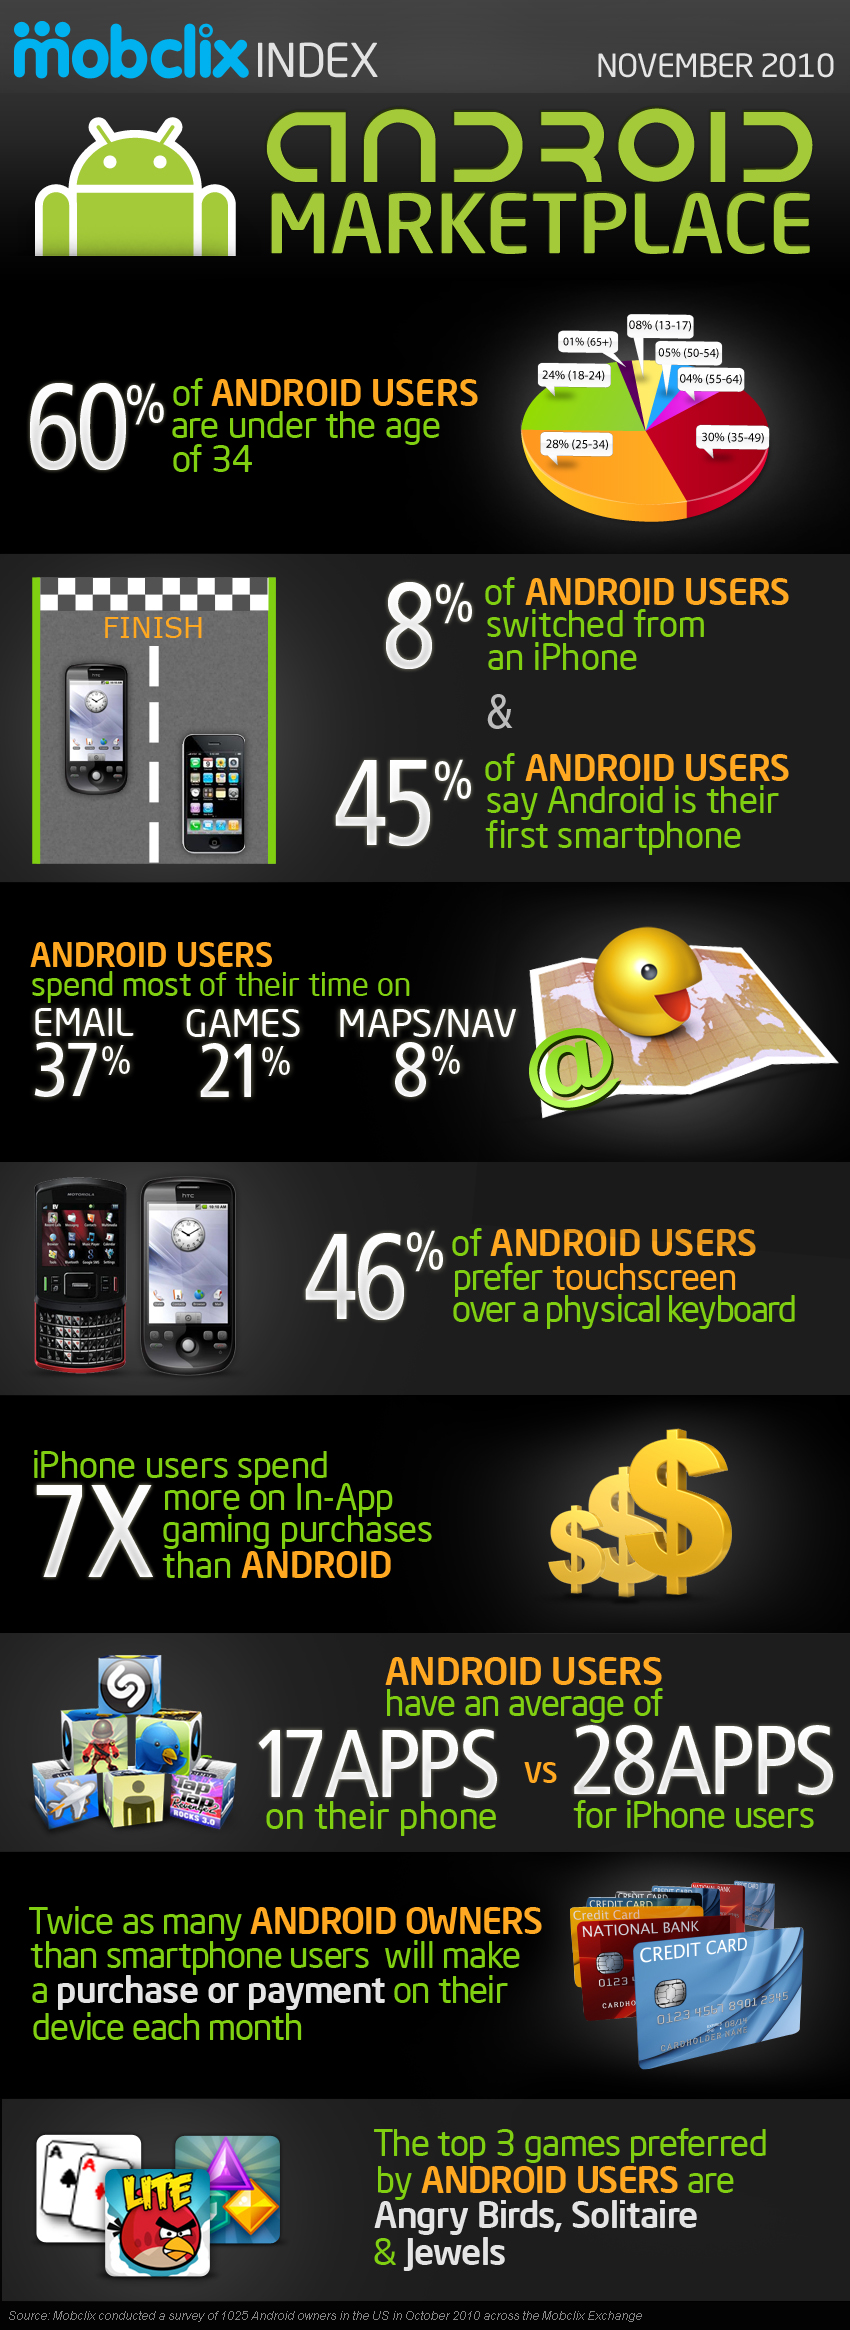 Android Market 2010 1